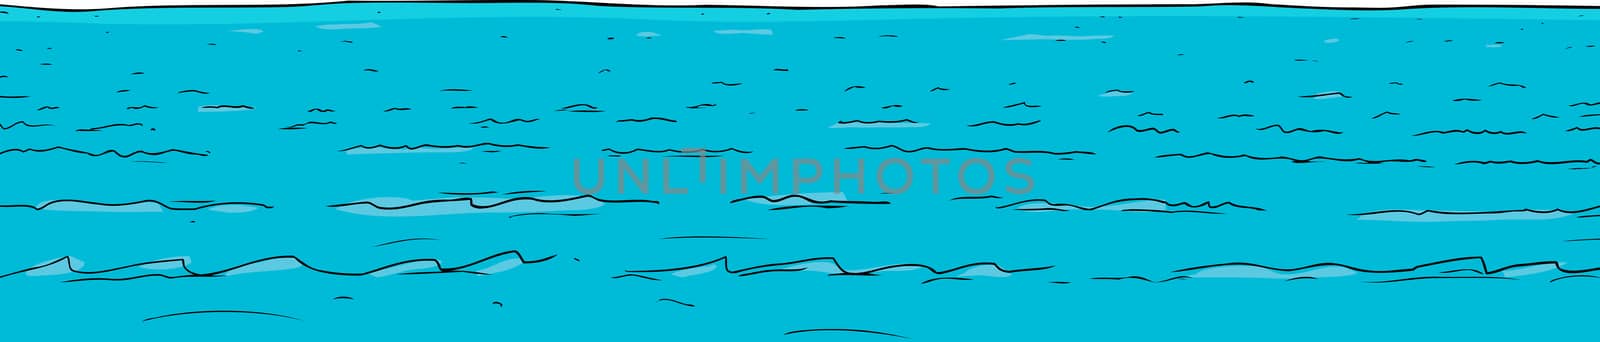 Cartoon background of blue sea water with waves